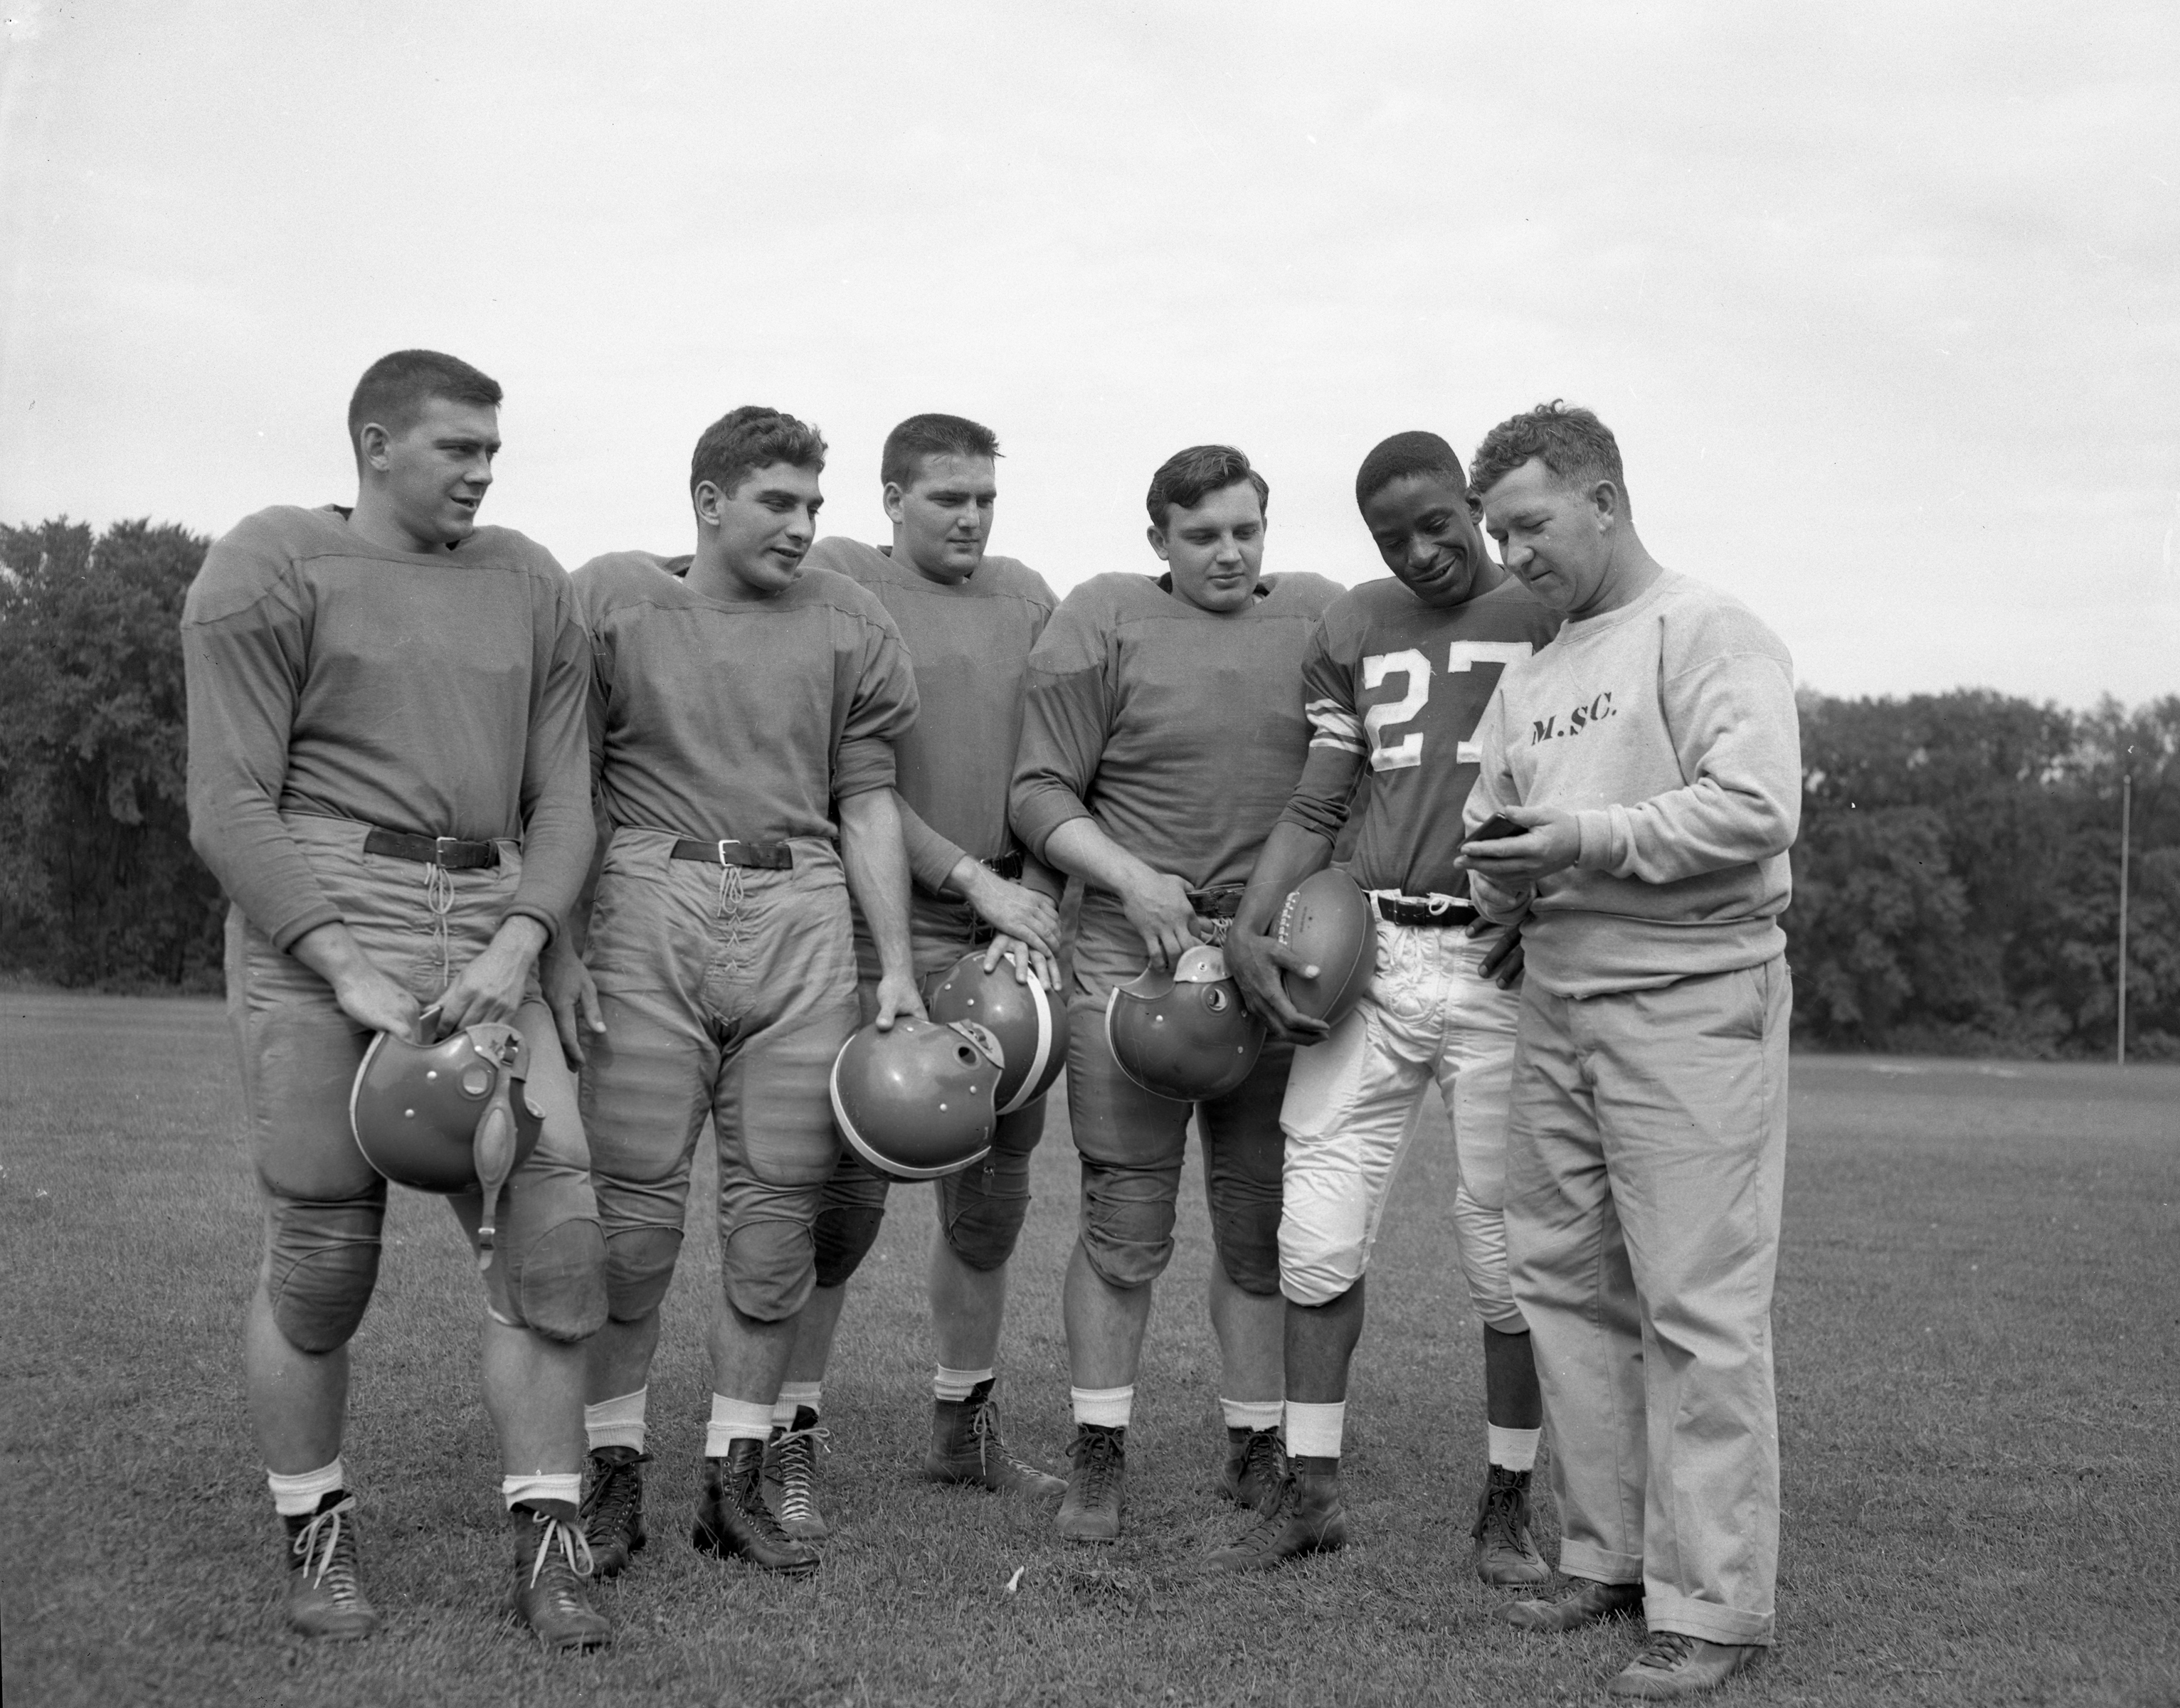 Sept. 1950, a group of sophomore football players from Pennsylvania. L to R: Renaldo Kozikowski, Vincent Pisano, Richard Tamburo, Bill Horrell, #27 Willie Thrower and Line Coach Duffy Daugherty.